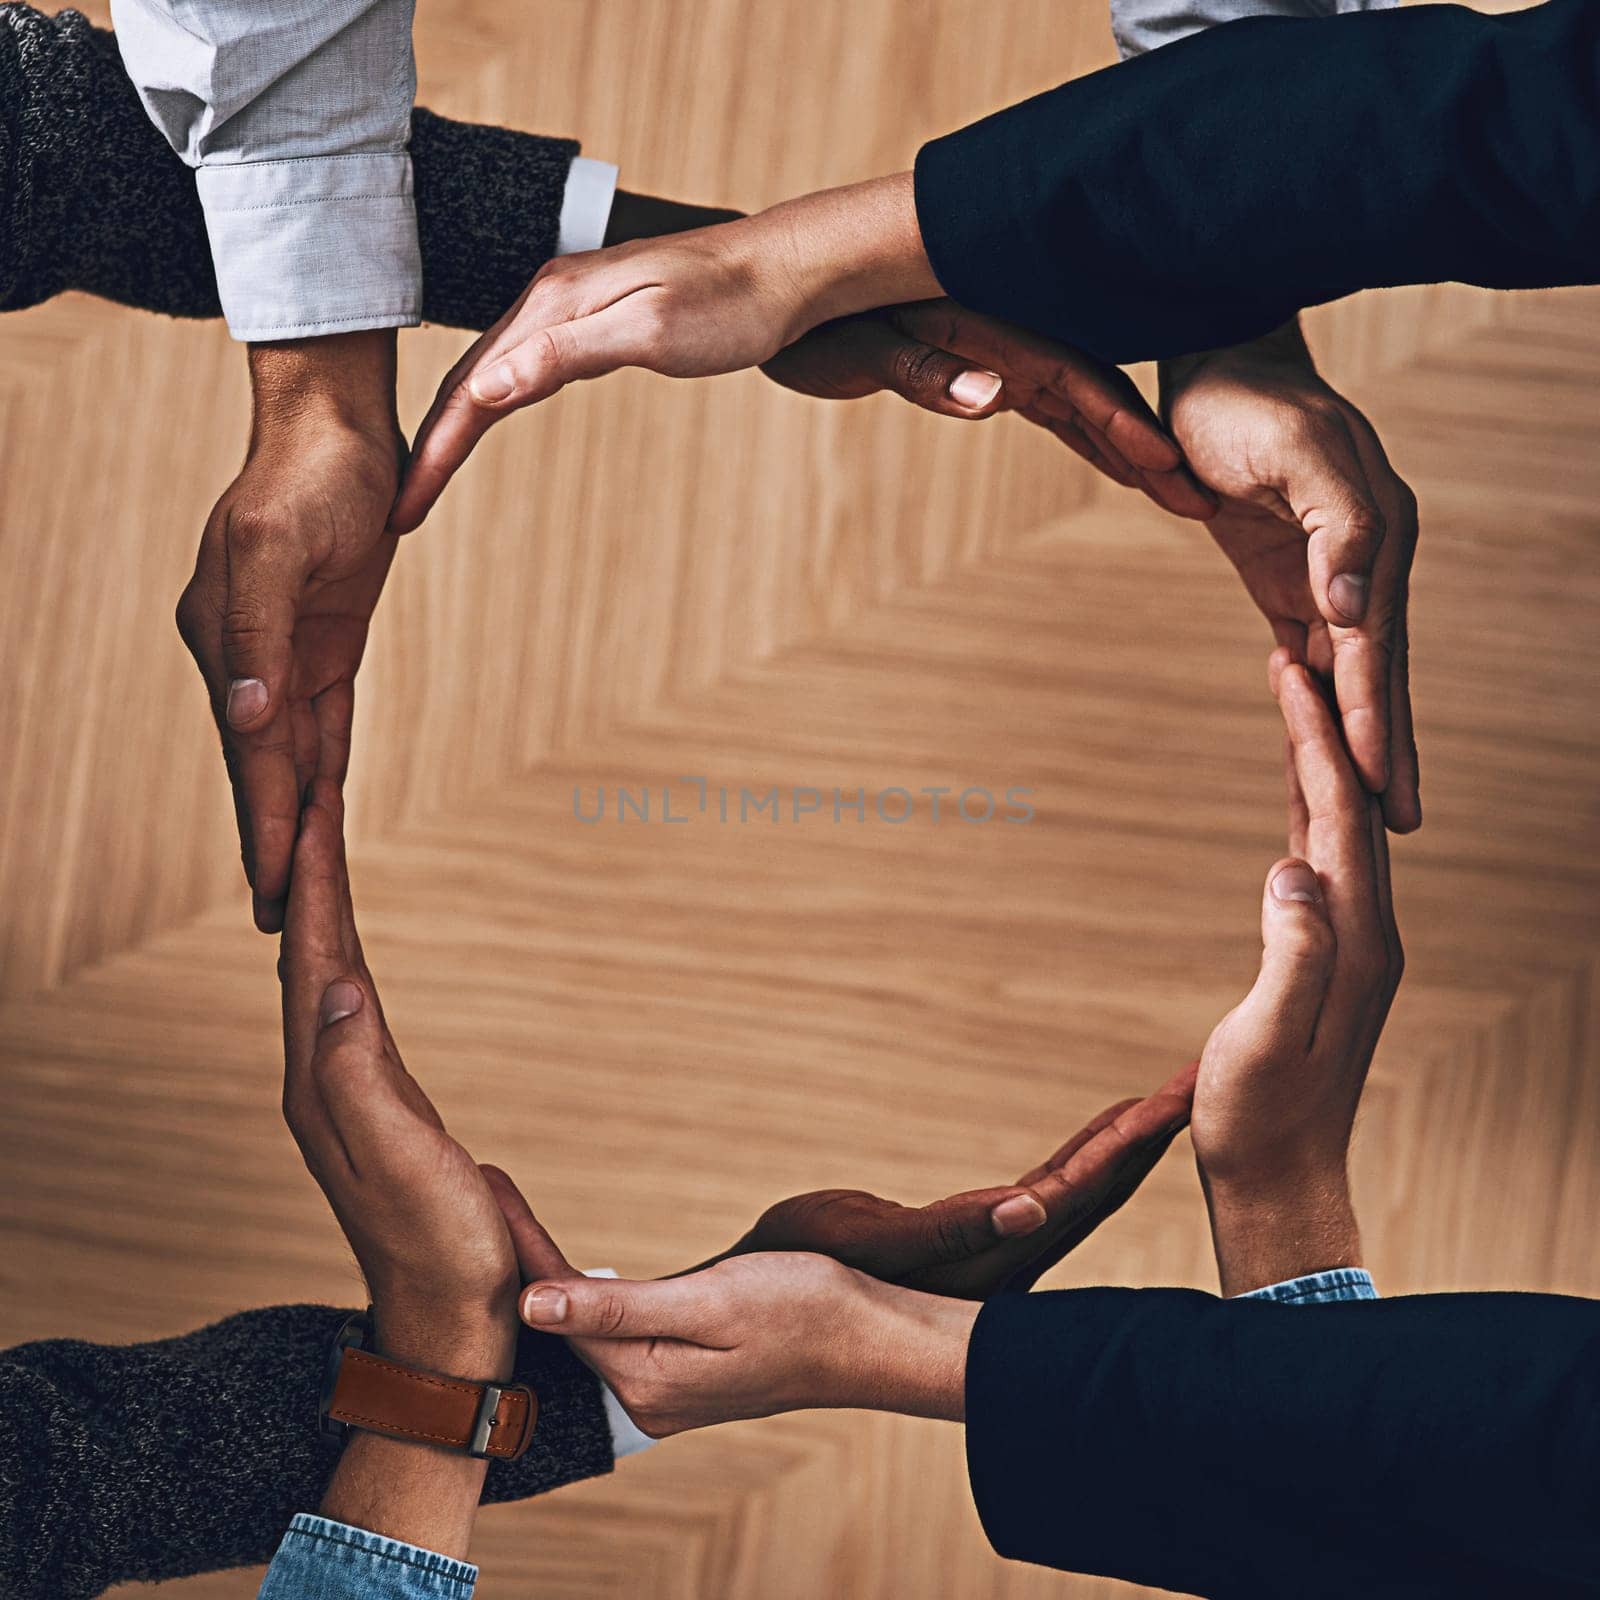 Above, recycle or hands of business people in circle for motivation, support or sustainability in office. Teamwork, recycling or employees for sustainable goals, community help or partnership group.